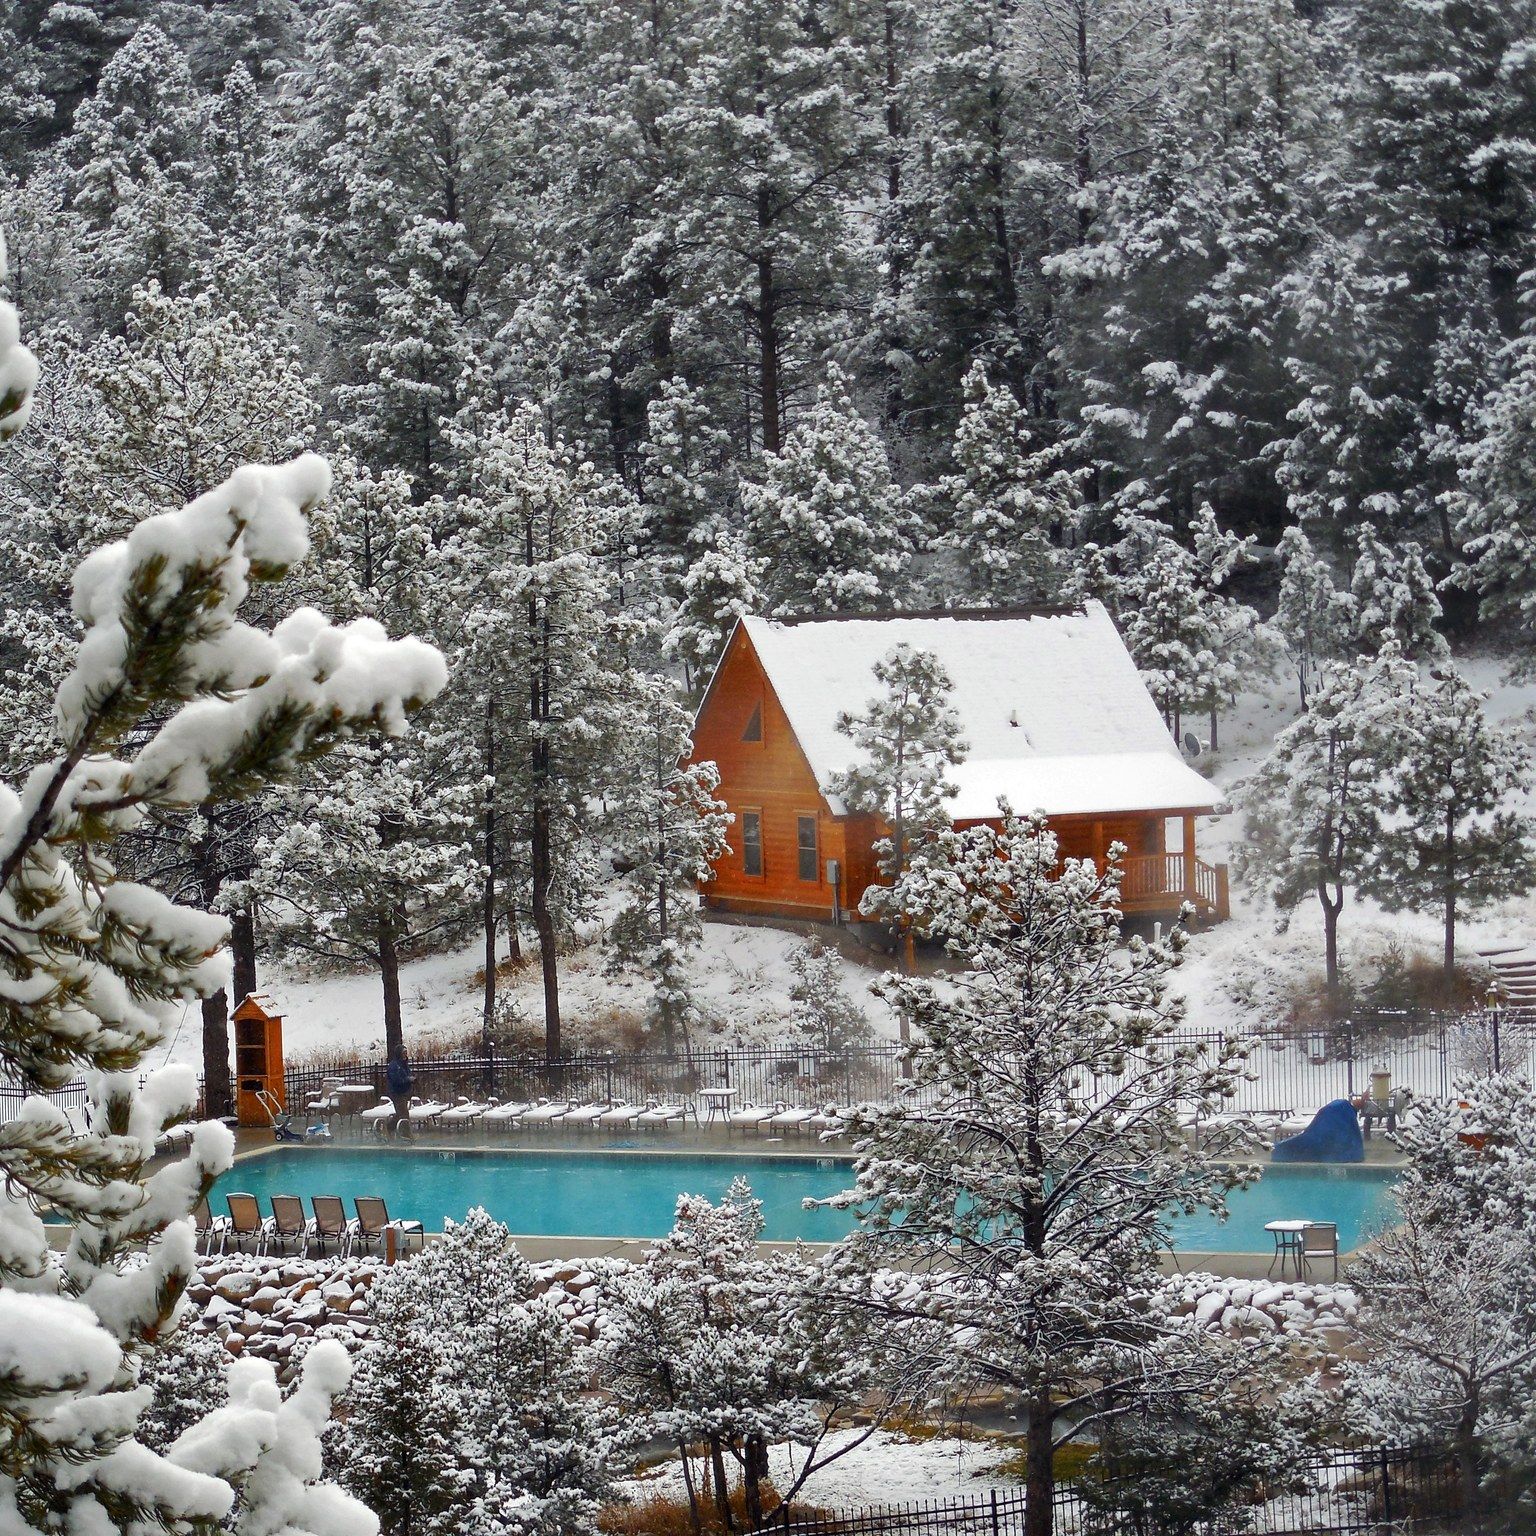 Hot Springs are included with your overnight stay at Mount Princeton Hot Springs Resort Nathrop, Colorado